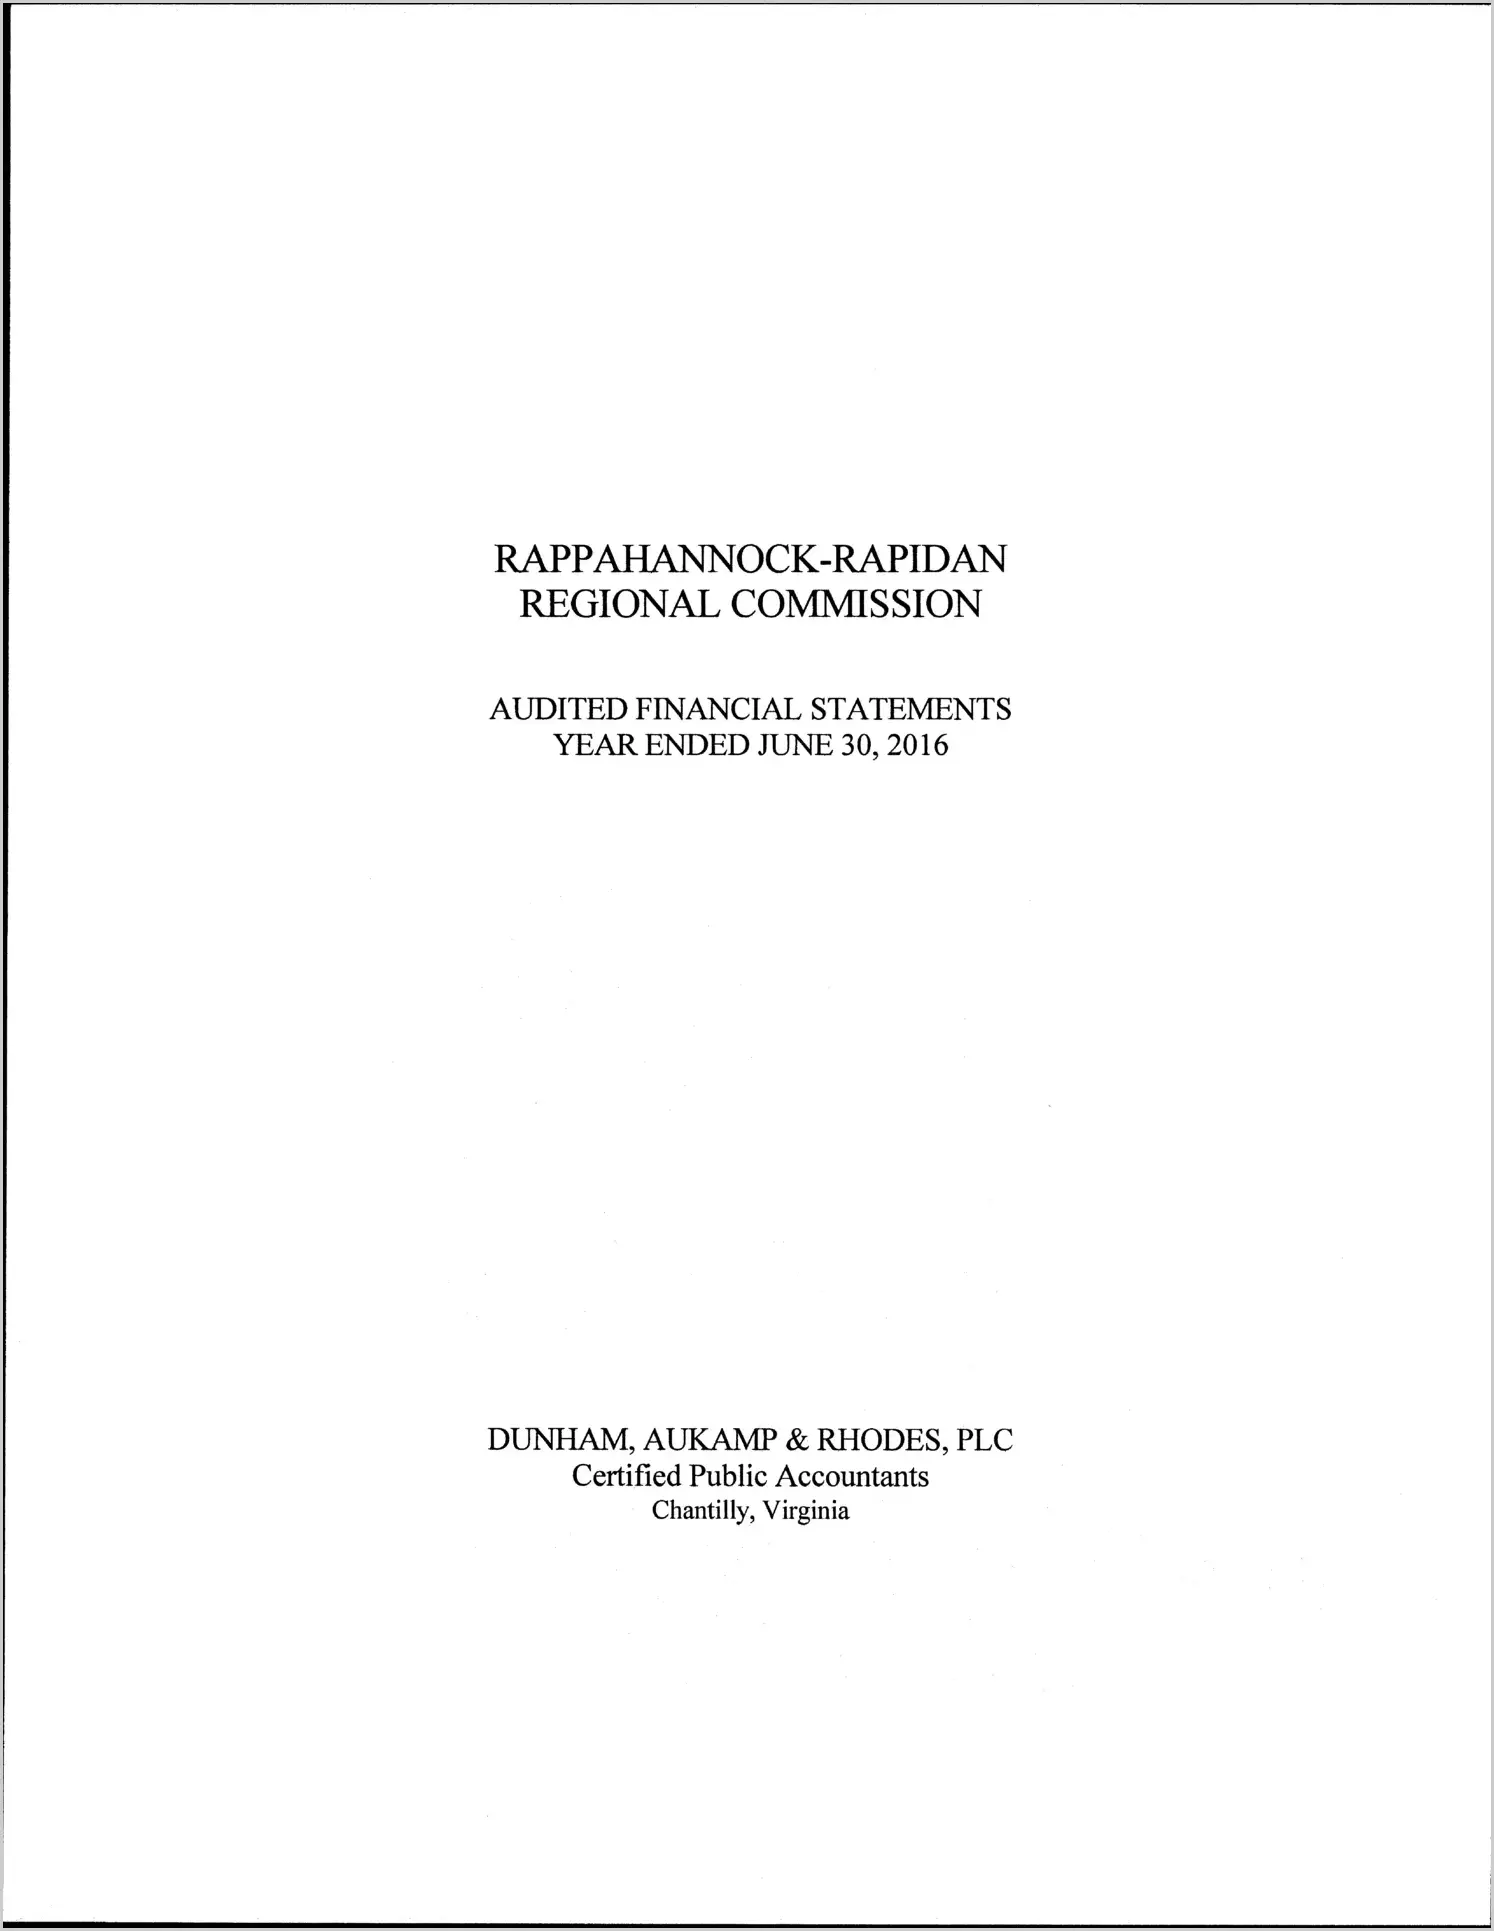 2016 ABC/Other Annual Financial Report  for Rappahannock-Rapidan Regional Commission